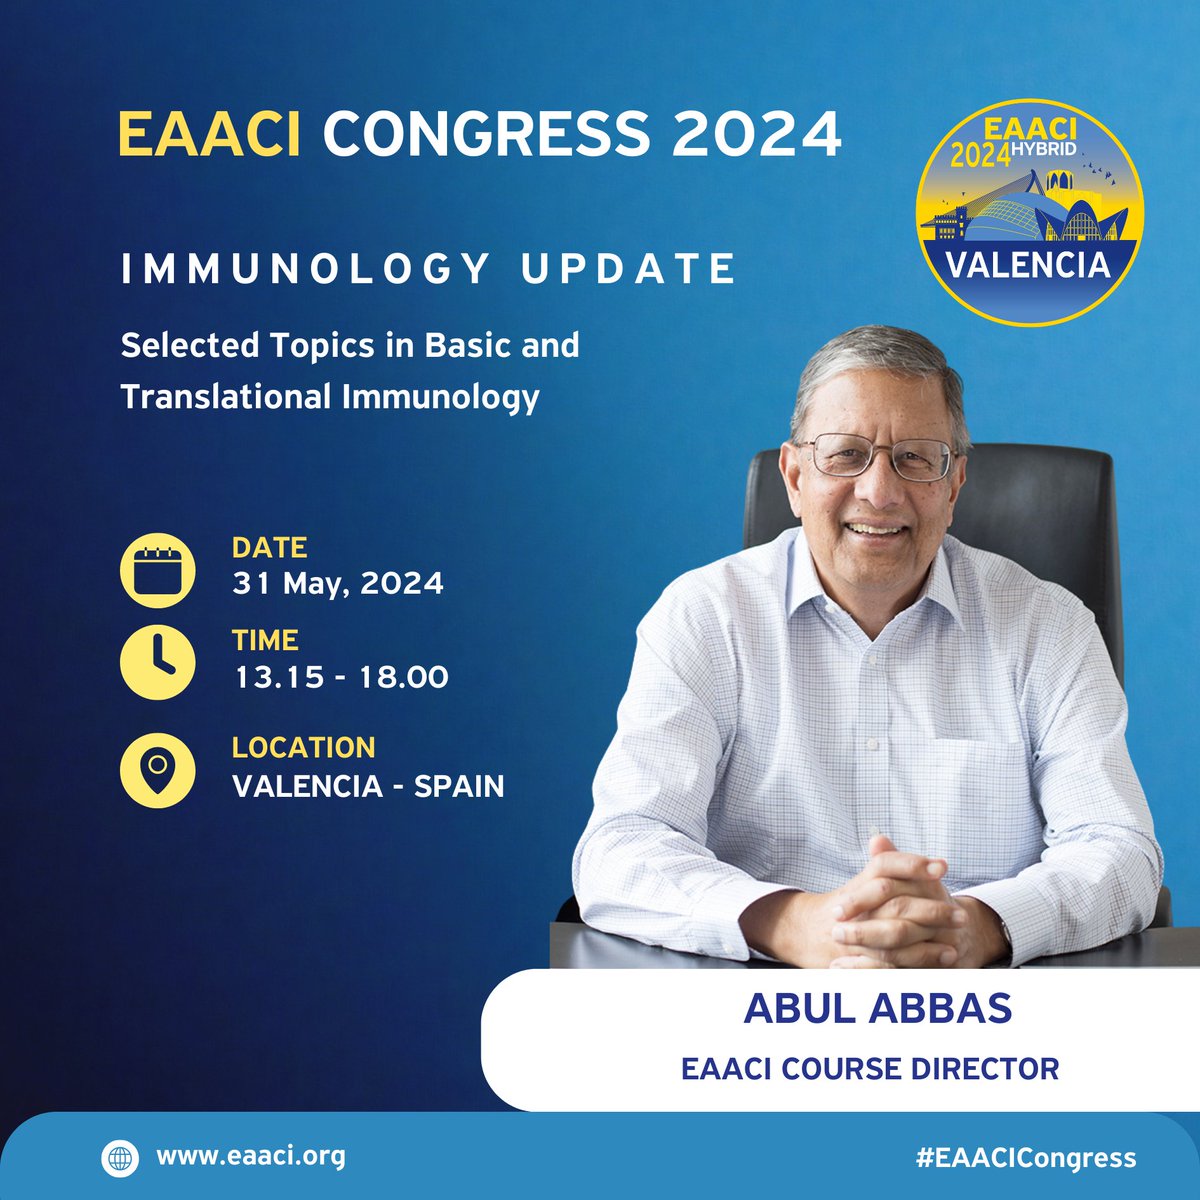 🔬 Enhance your knowledge of immunology at the 'Immunology Update: Selected Topics in Basic and Translational Immunology' course, led by Dr.Abbas, during EAACI Congress 2024 in Valencia! Limited spots available, register now👉🏼 shorturl.at/htHP0 #EAACIcongress #Valencia